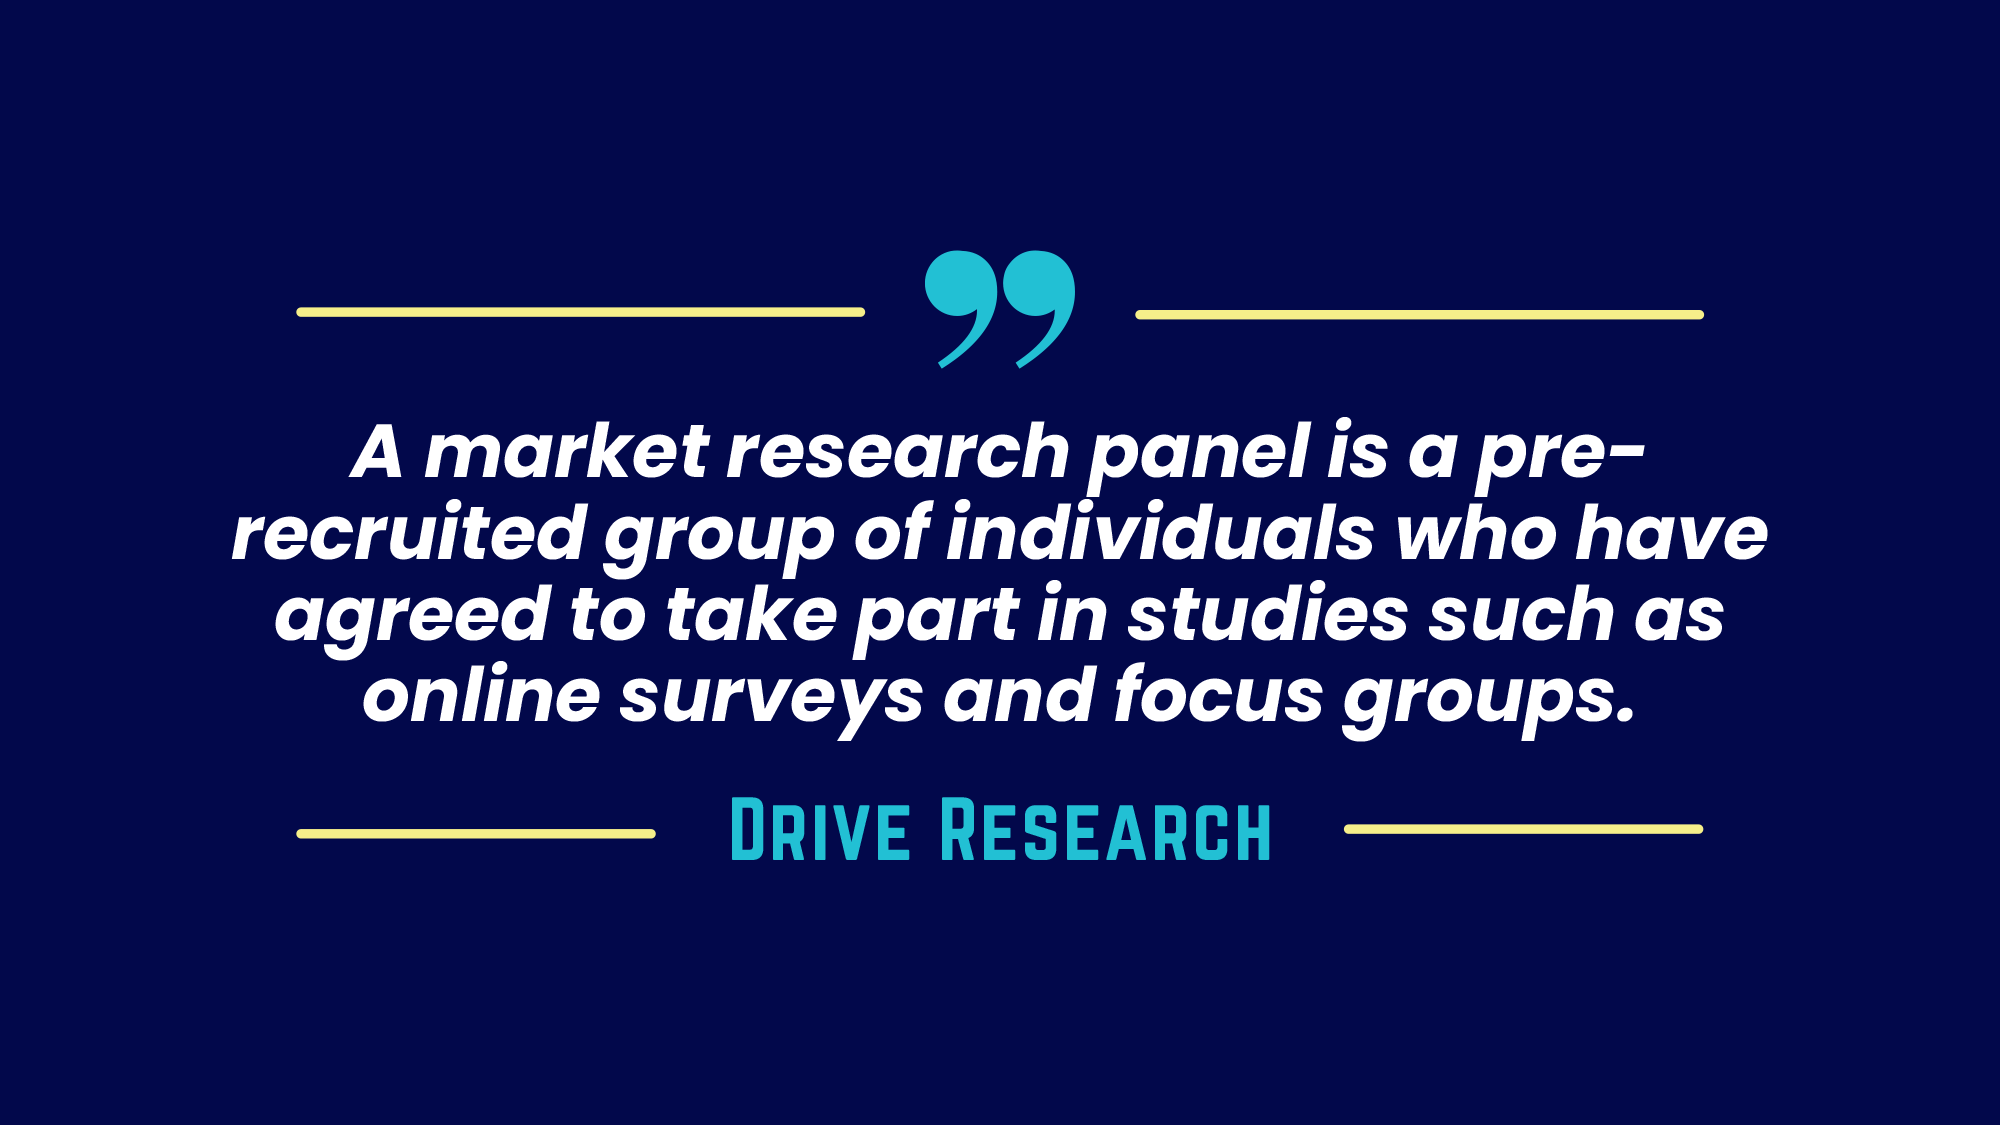 A market research panel is a pre-recruited group of individuals who have agreed to take part in studies such as online surveys and focus groups.